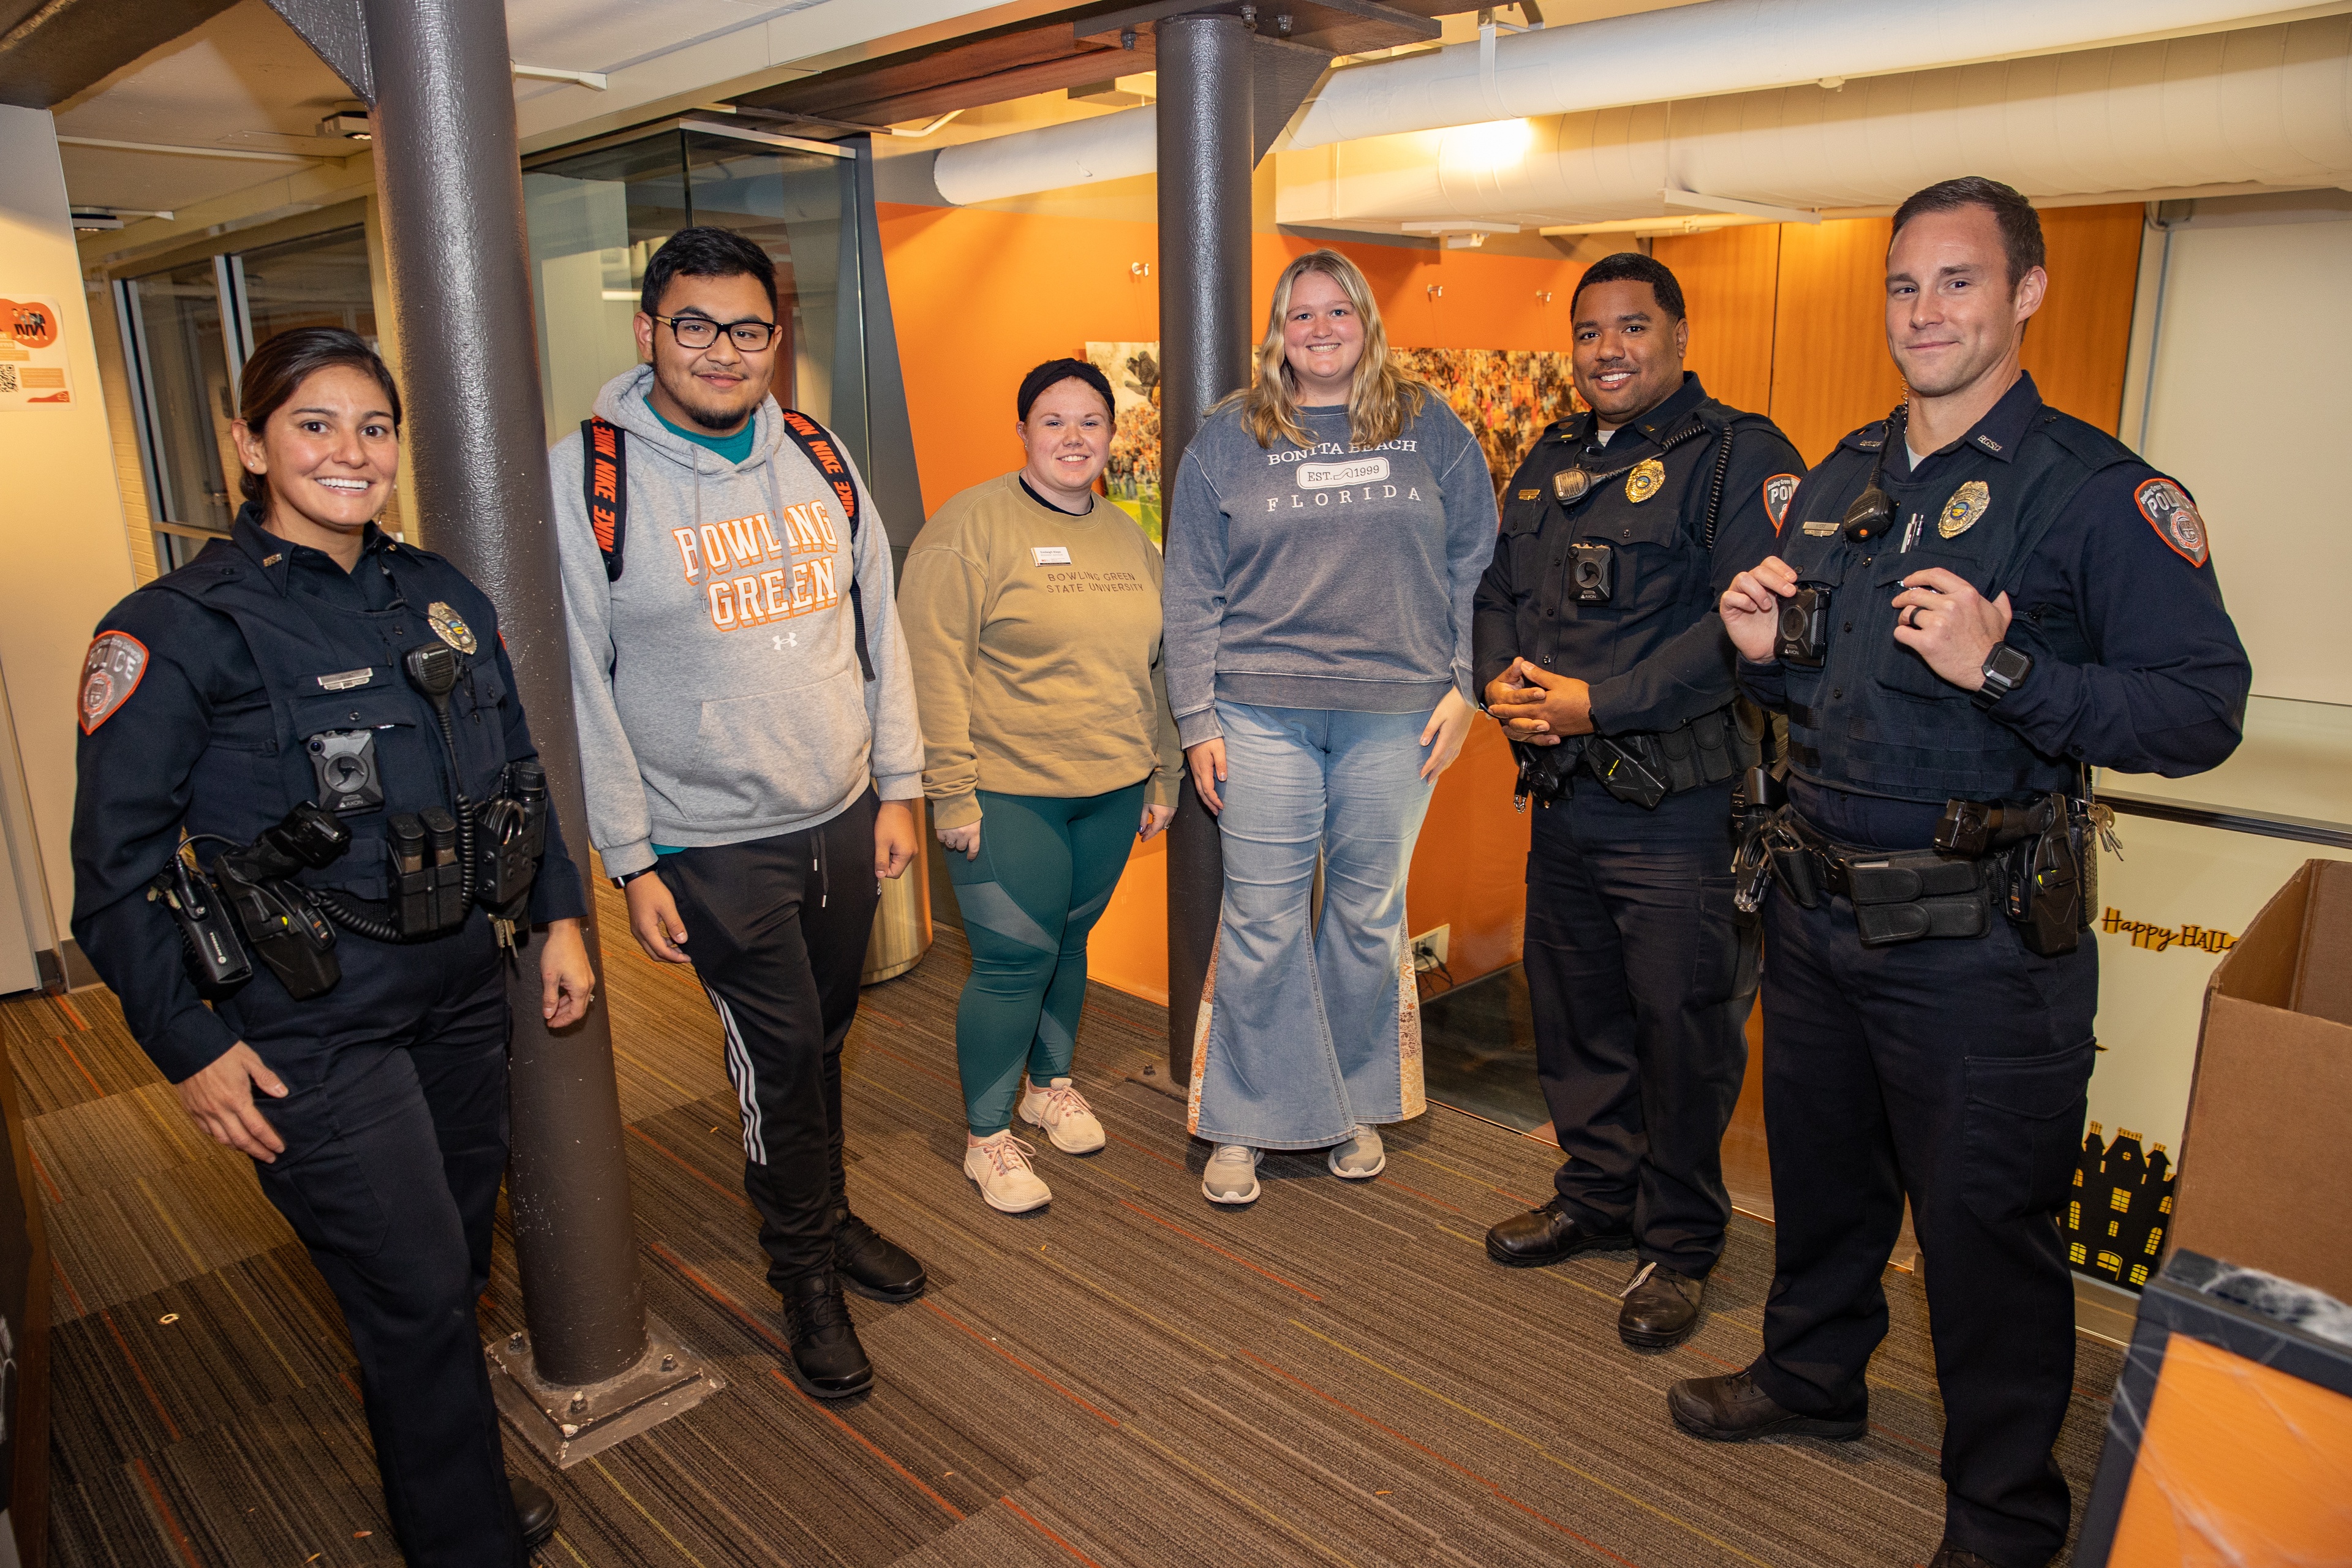 BGSU Police officers pose for a photo with students inside a residence hall.